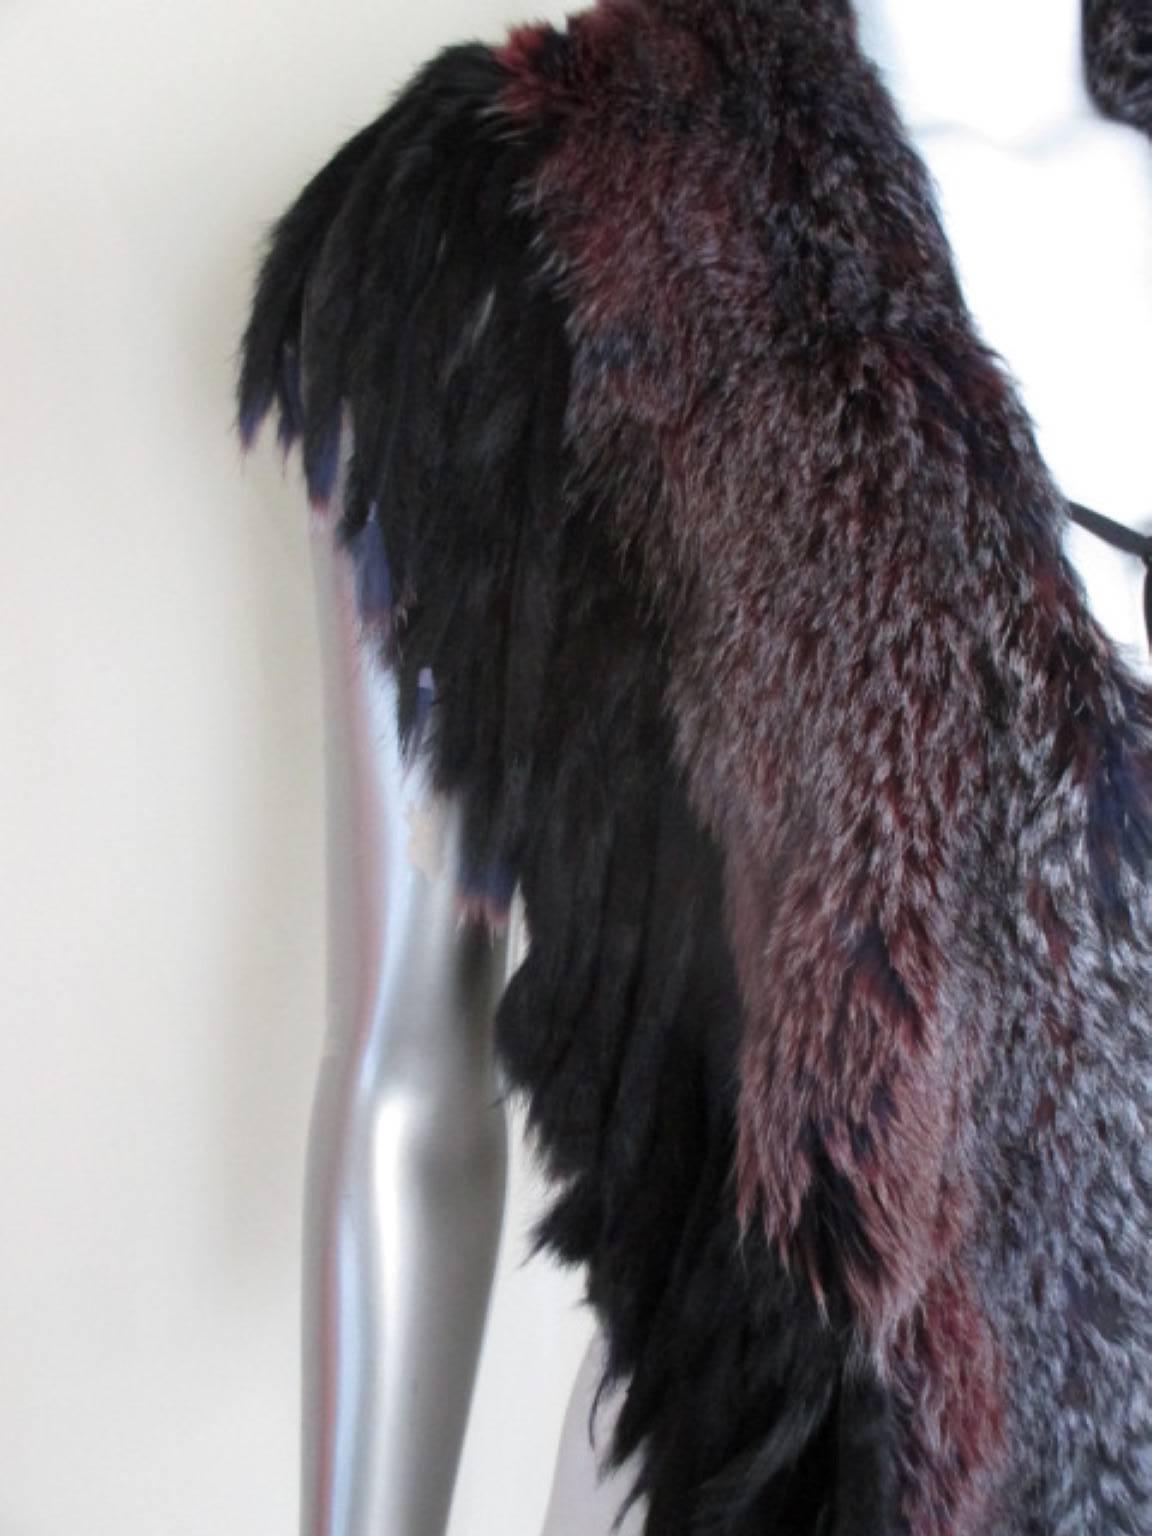 This fox stole is dyed in purple/blue/red with fox tails and trimmed with black fringe.
Size 175 cm x 27 cm

Please note that vintage items are not new and therefore might have minor imperfections. 